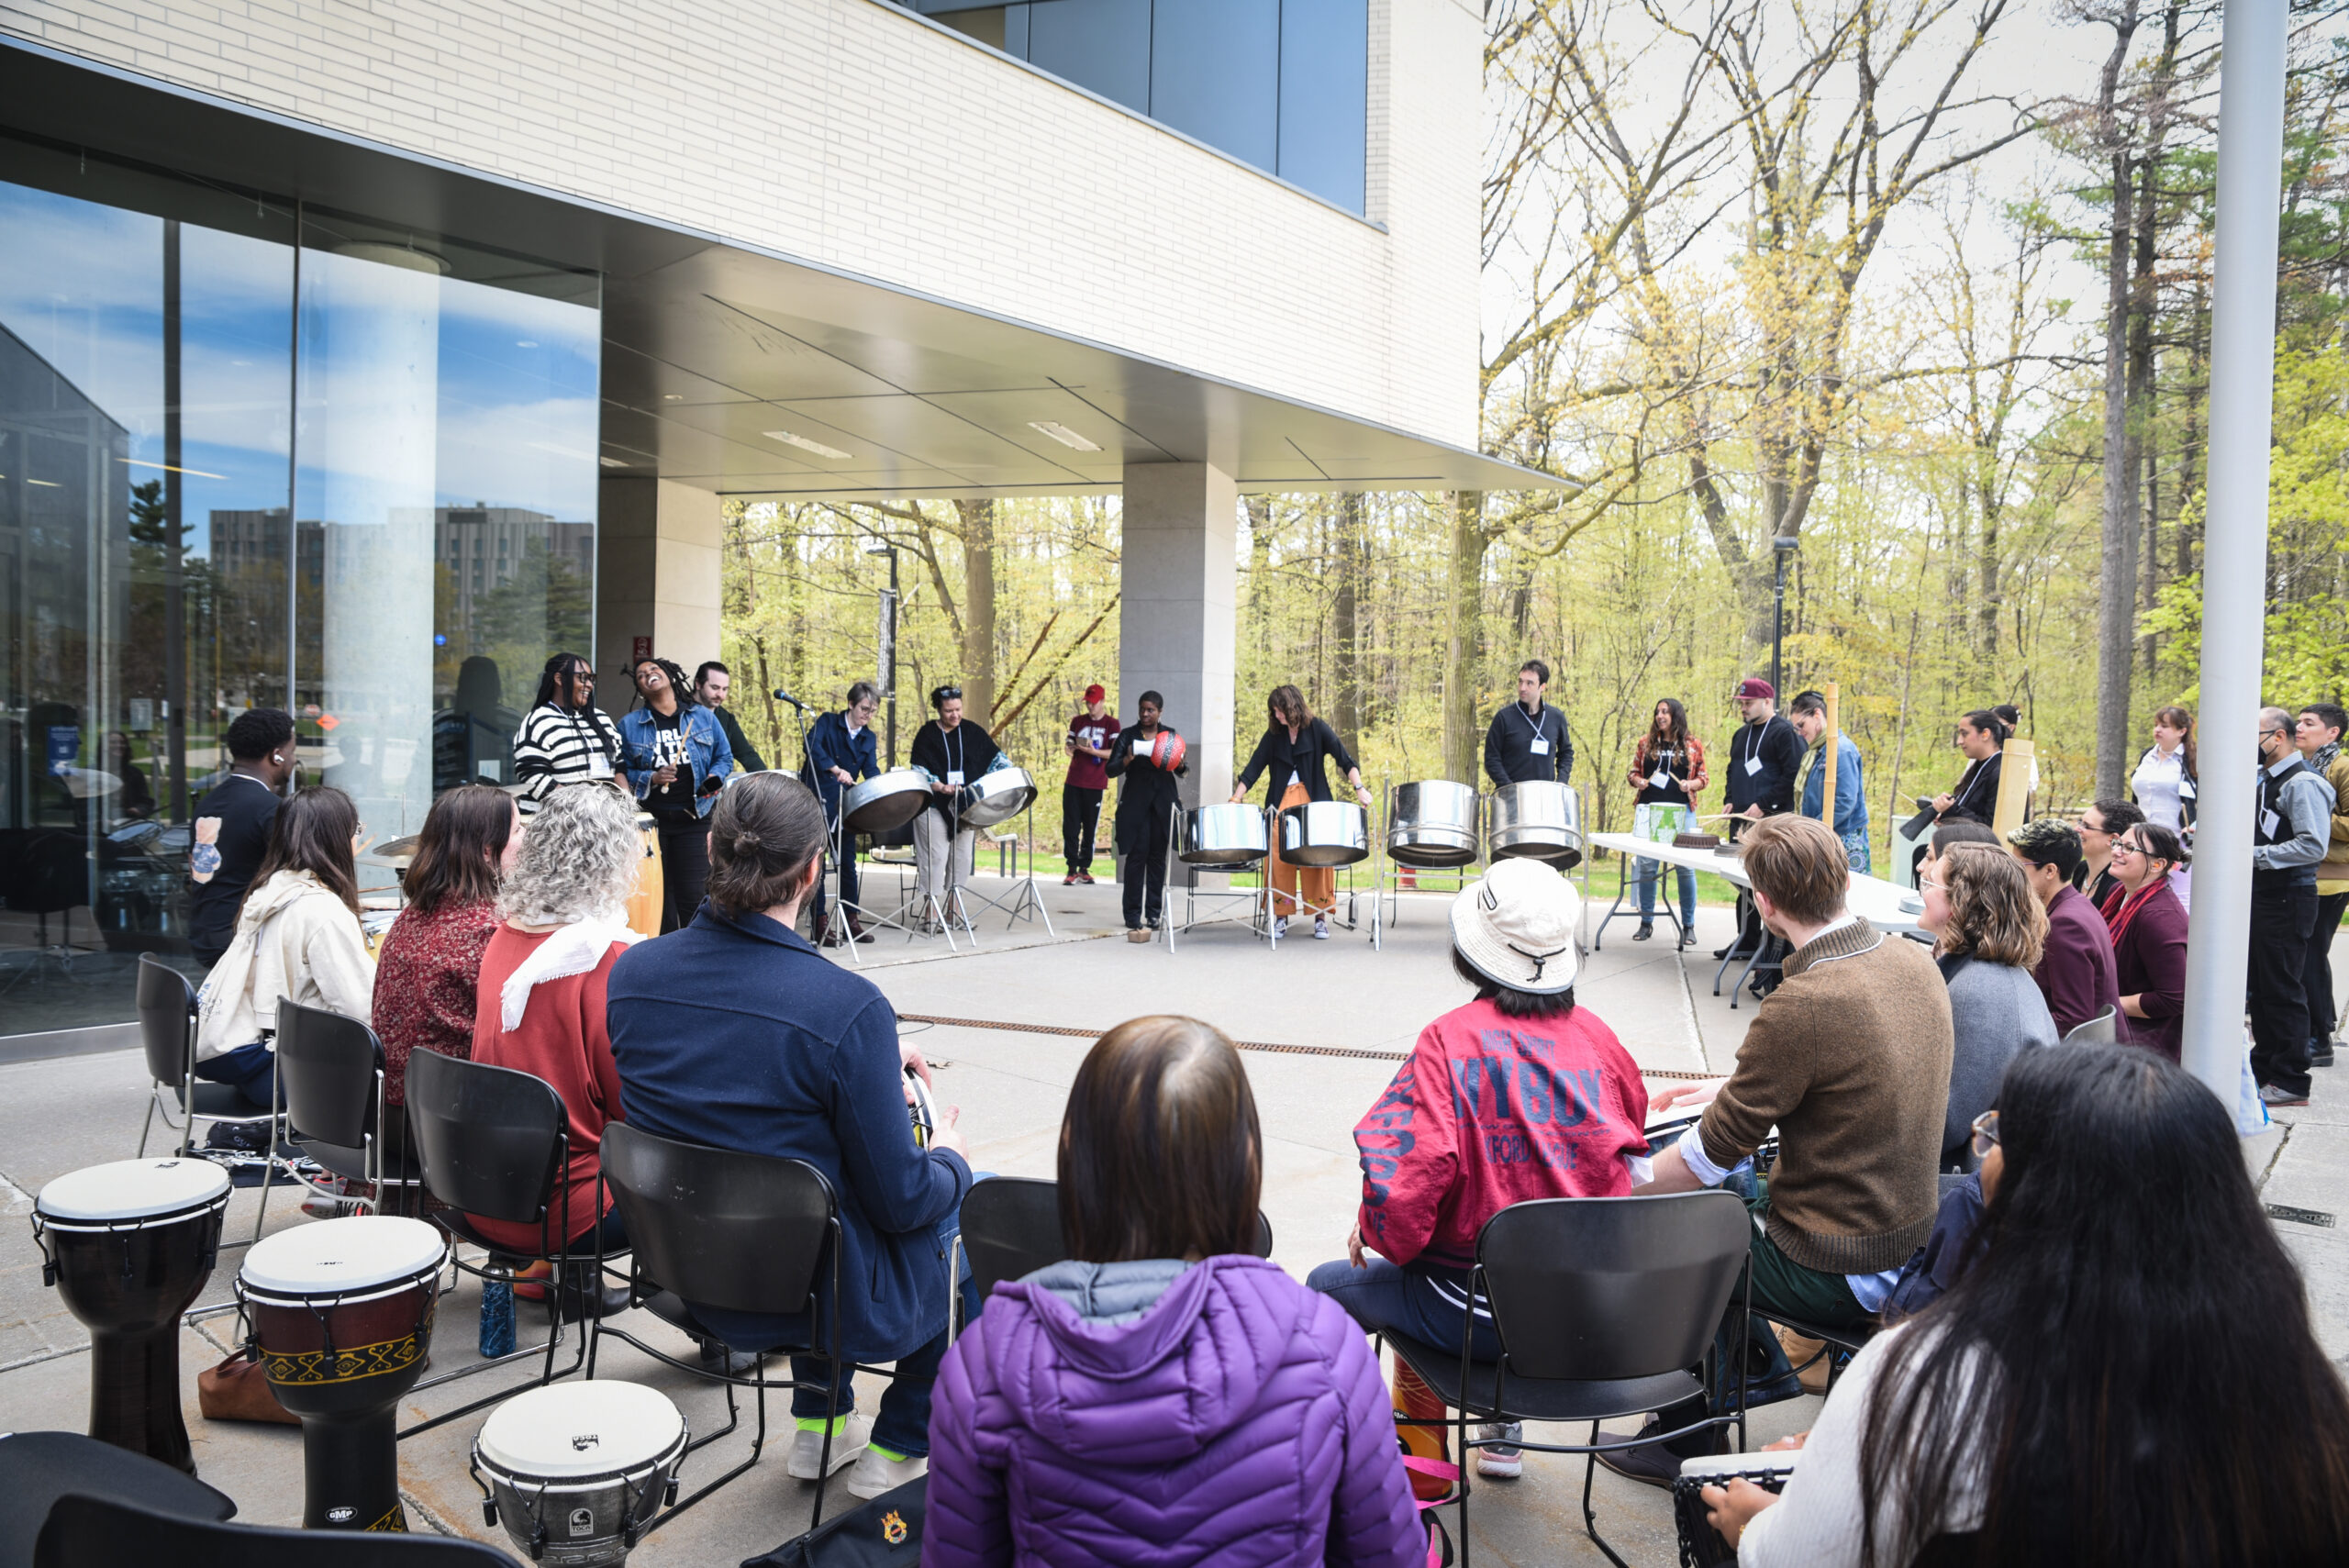 A circle of participants playing various instruments, including steel pans, hand drums and bells